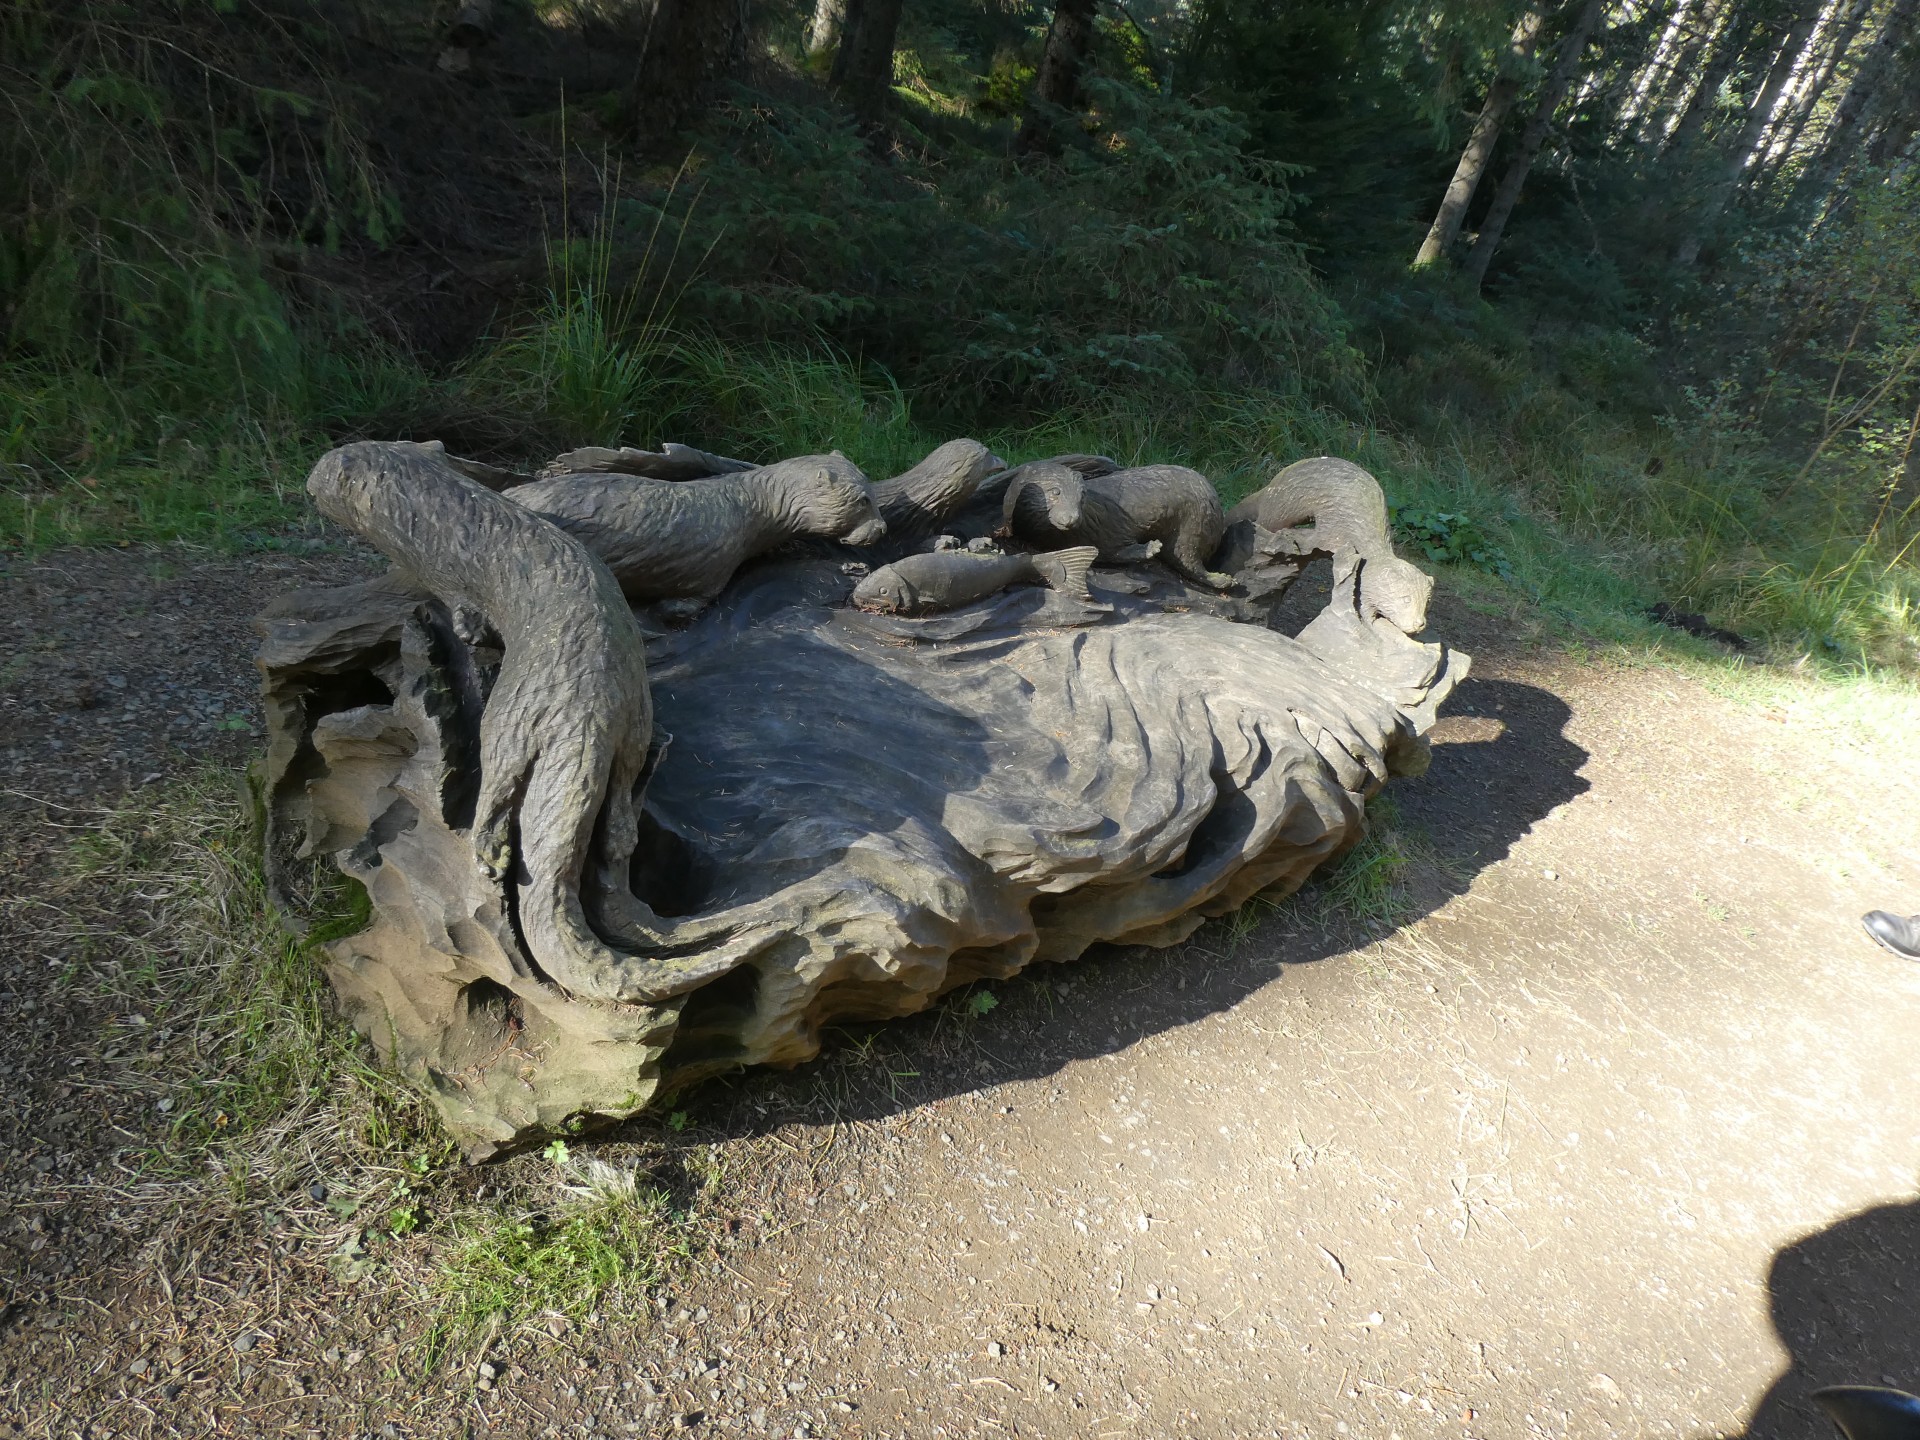 And another sculpture this time a wooden bench